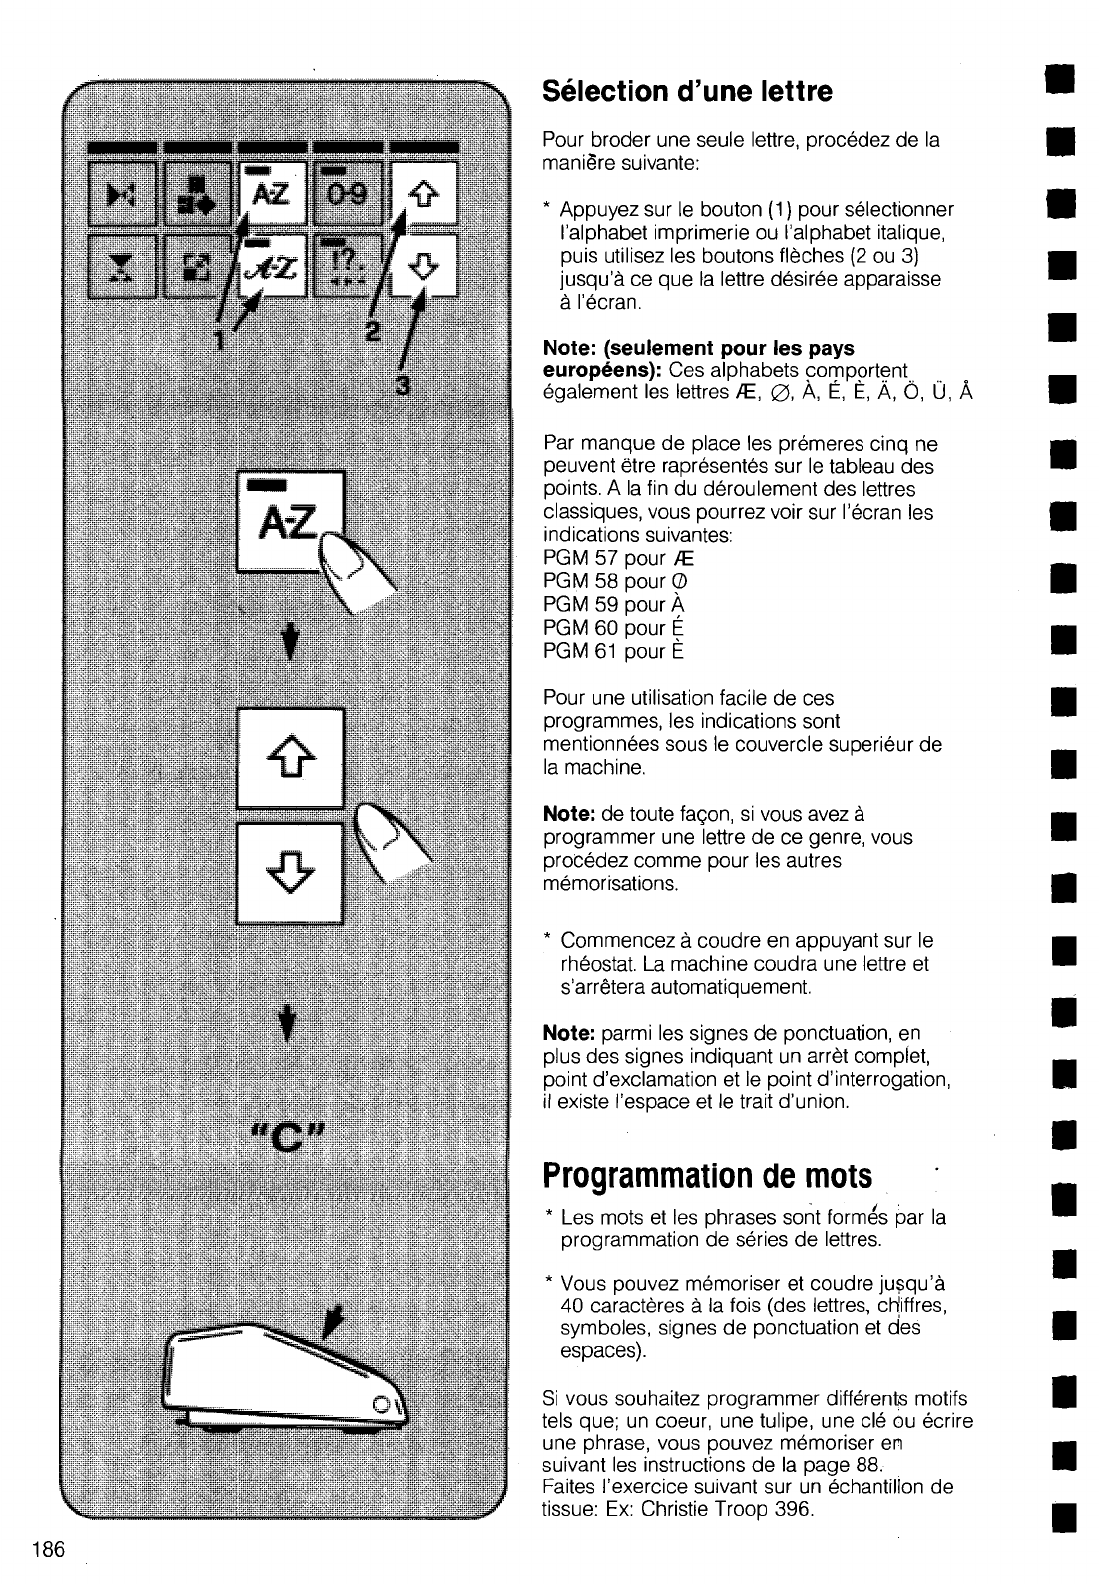 Manual Singer 9900 Page 186 Of 243 English Spanish French